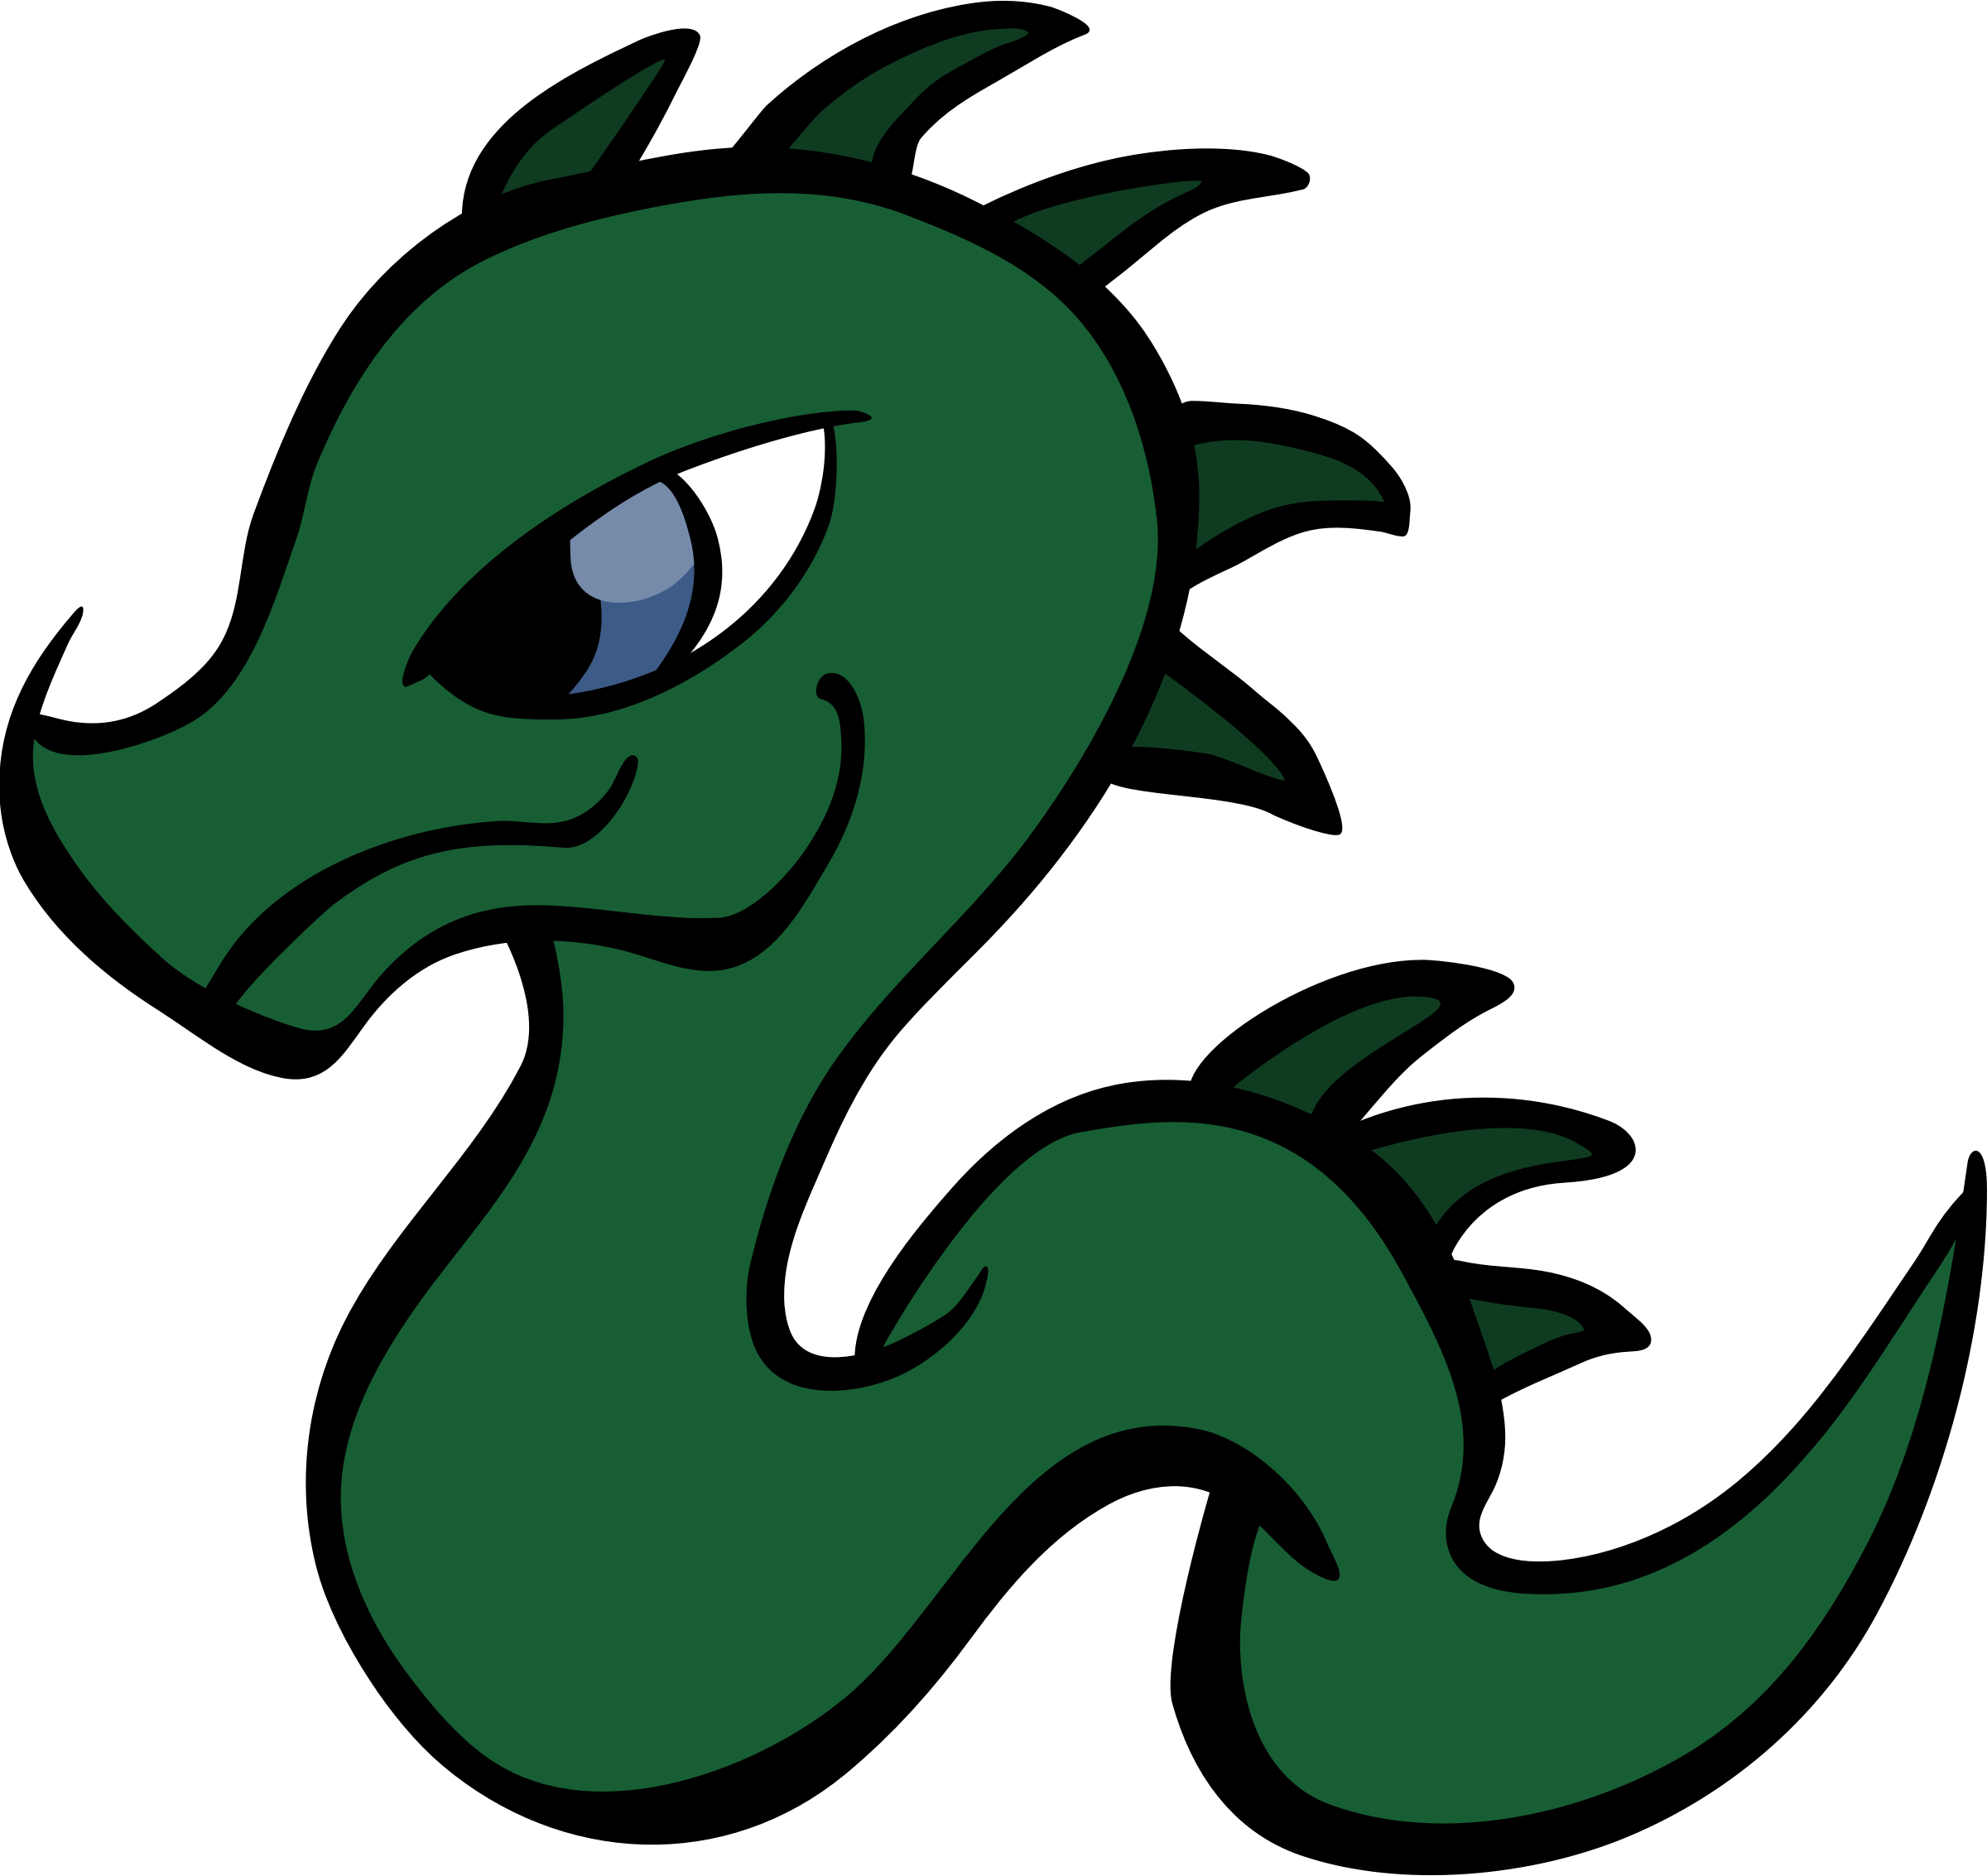 Baby Dragon Vector Clipart image Free stock photo